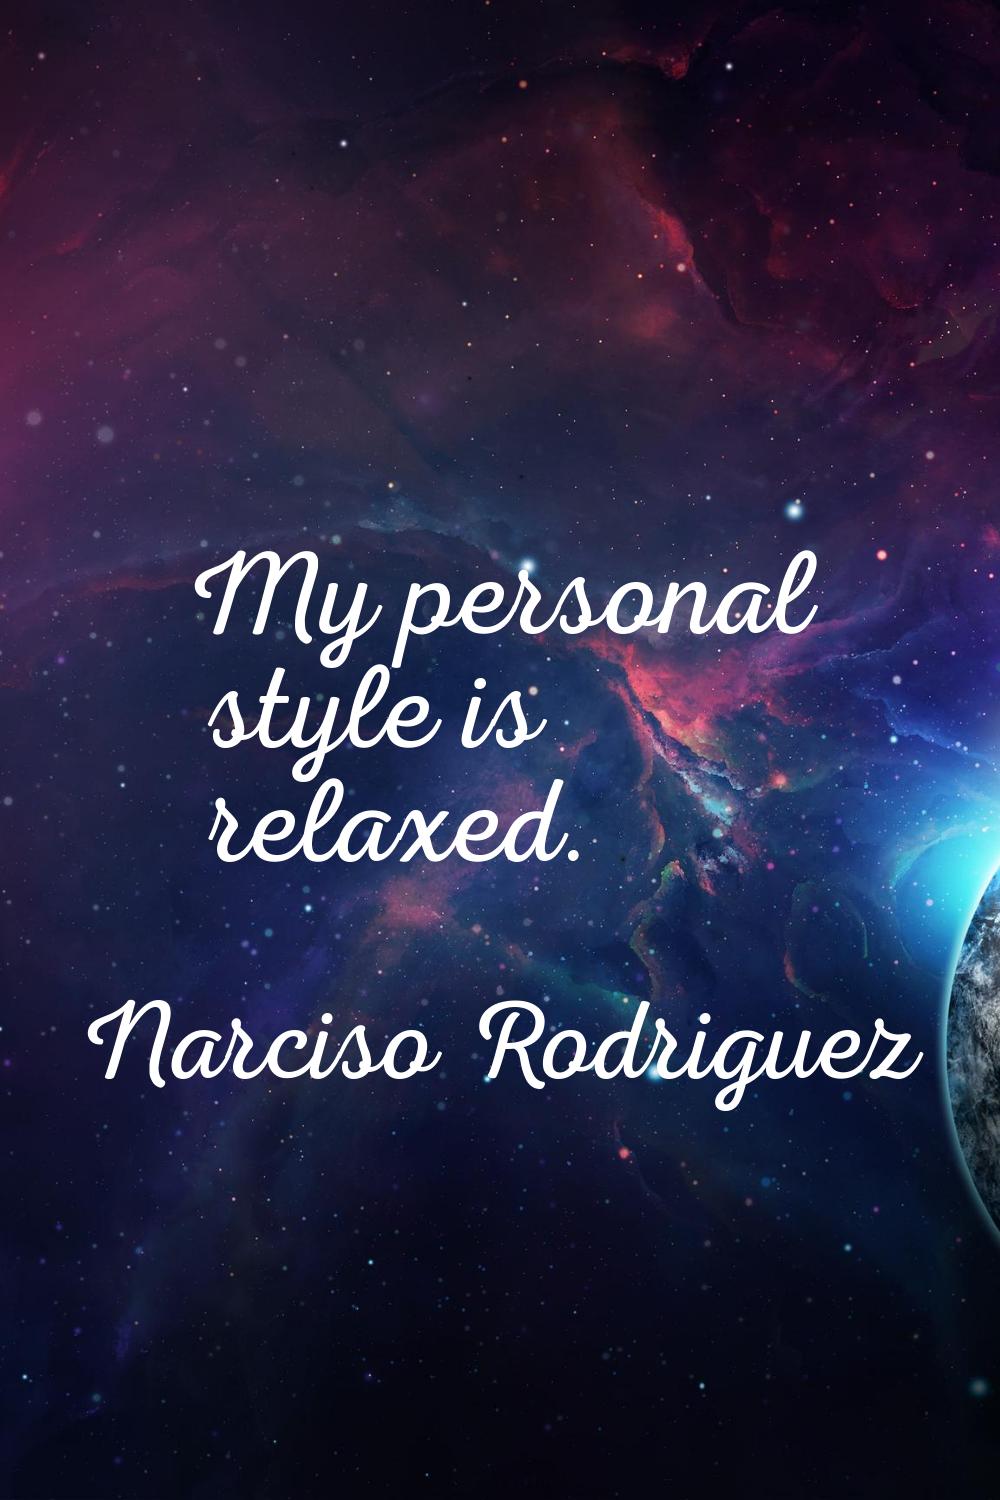 My personal style is relaxed.